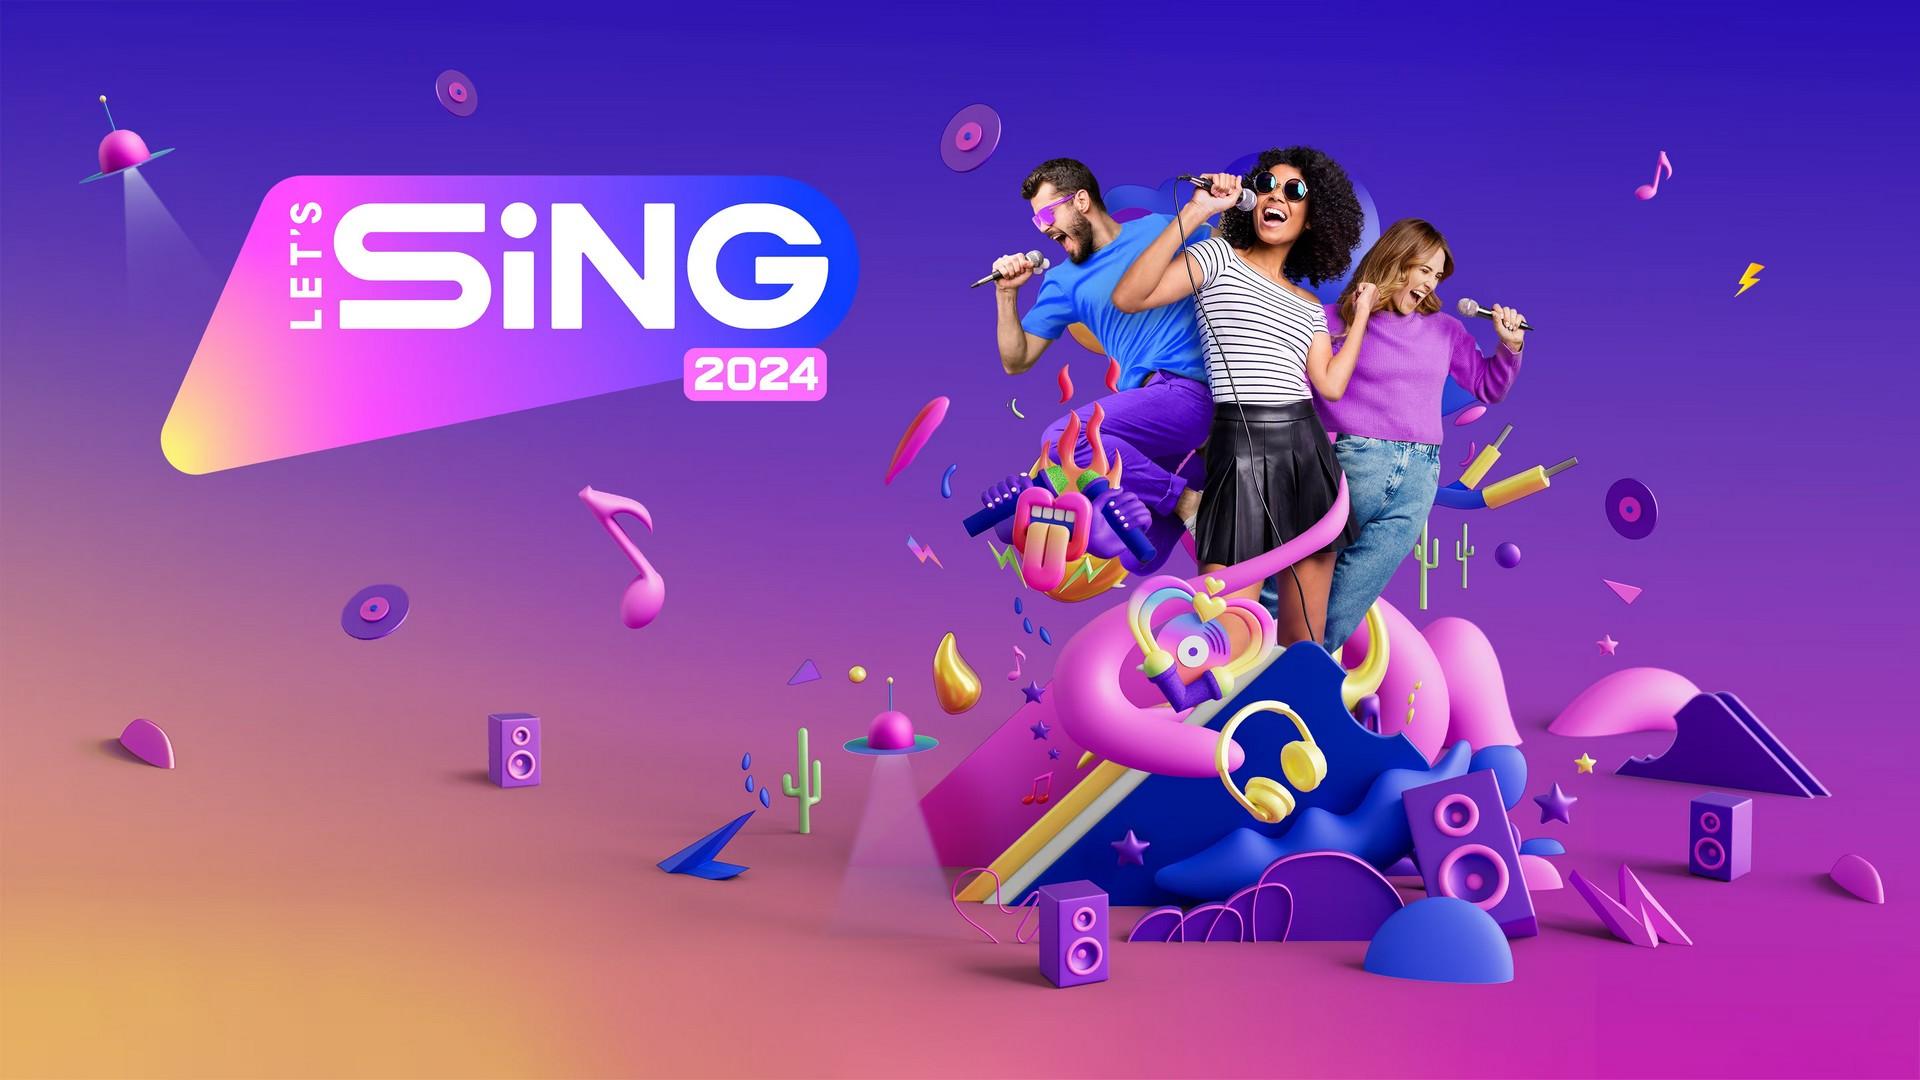  Let's Sing 2023 Nintendo Switch : Video Games